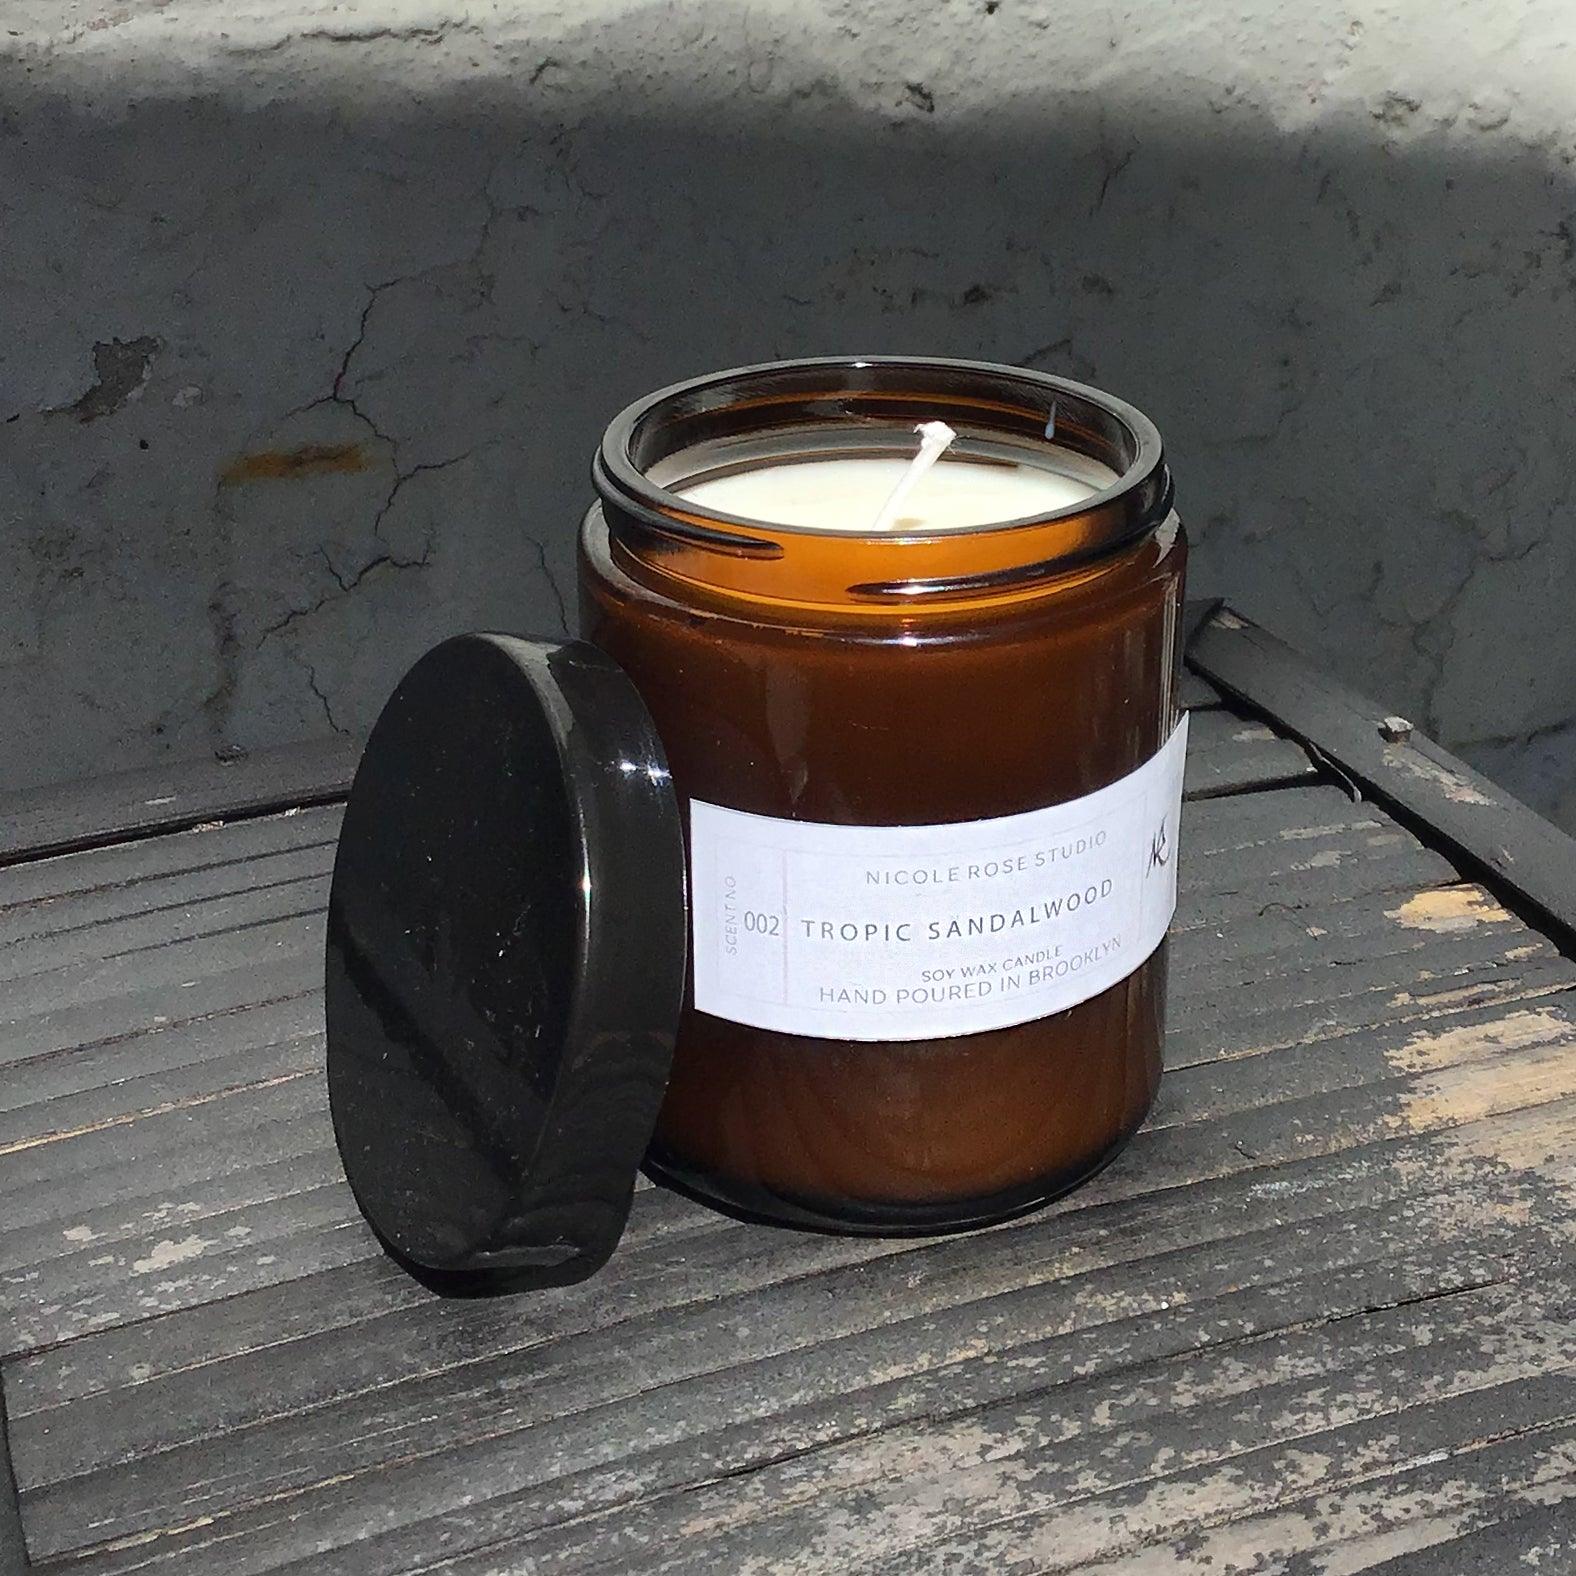 ethically sourced Citrus + Sage Soy Wax Candle Life In Alignment